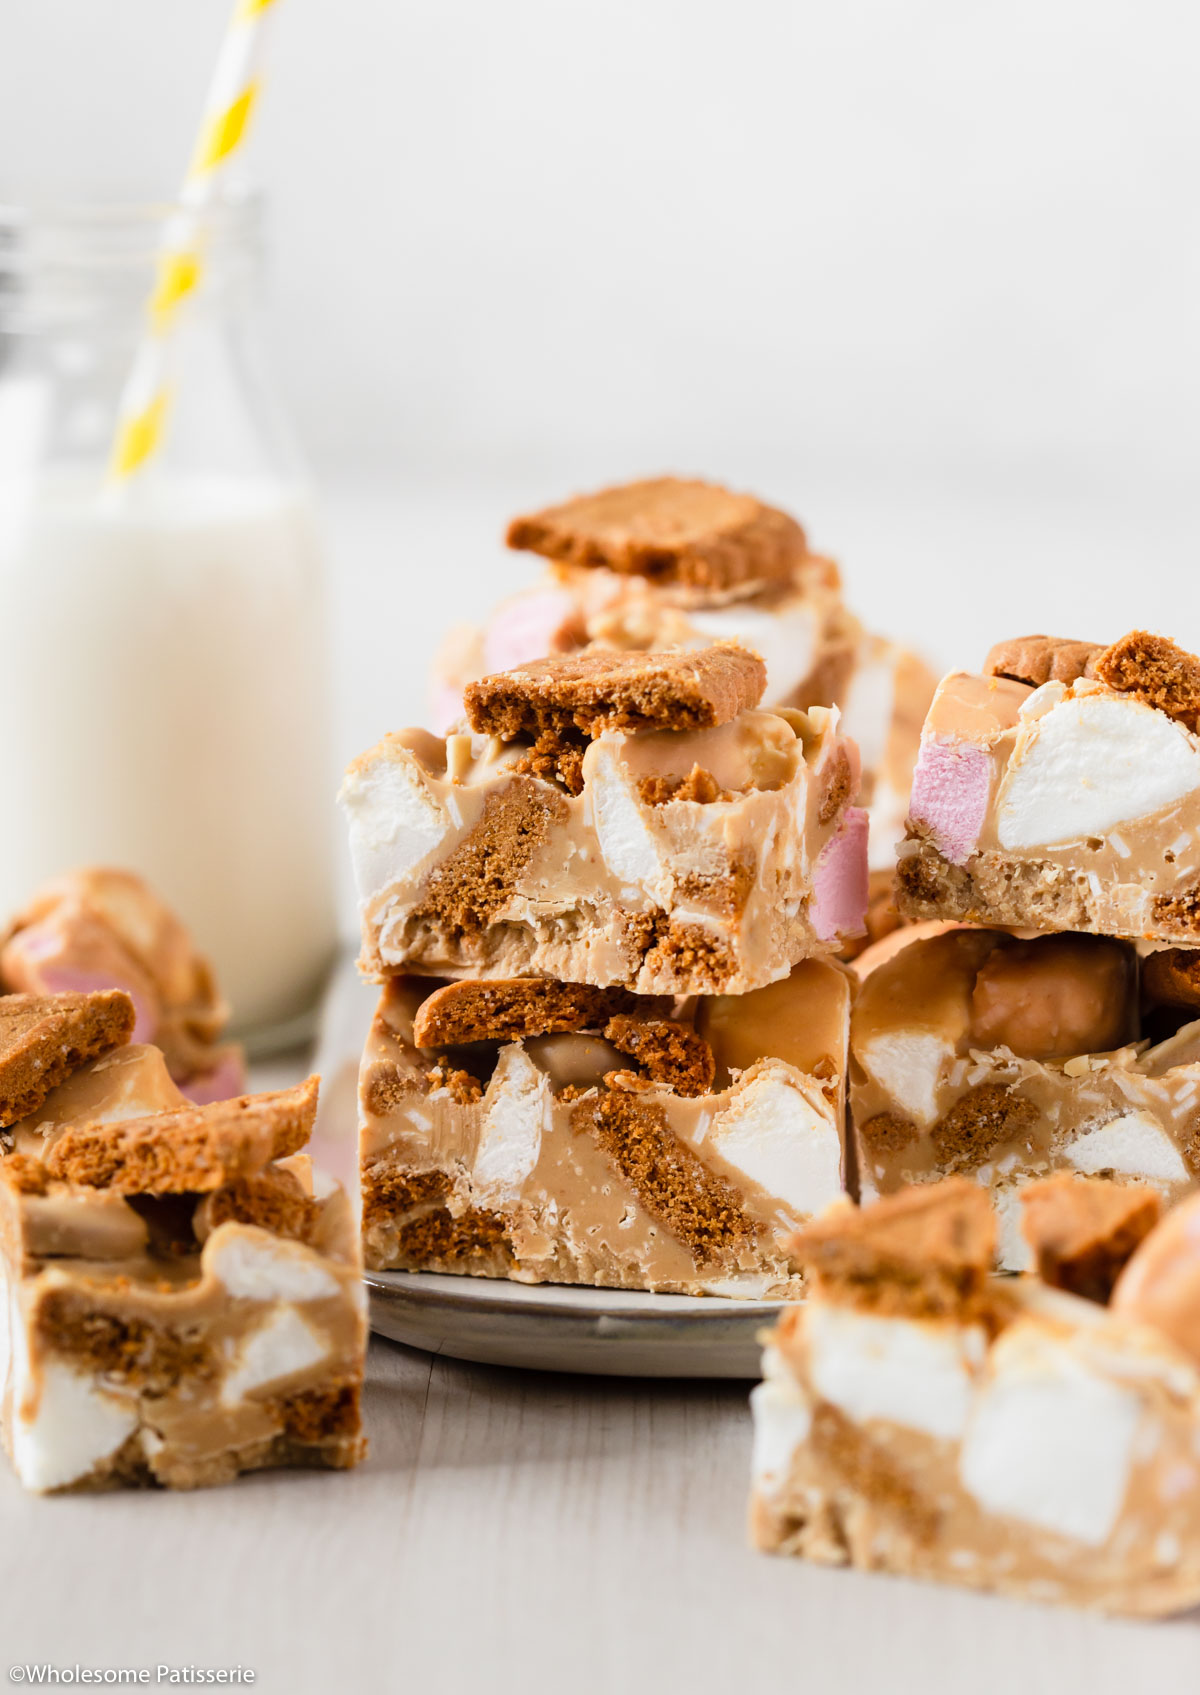 Biscoff rocky road cut into squares and stacked on top of each other to form a tower.